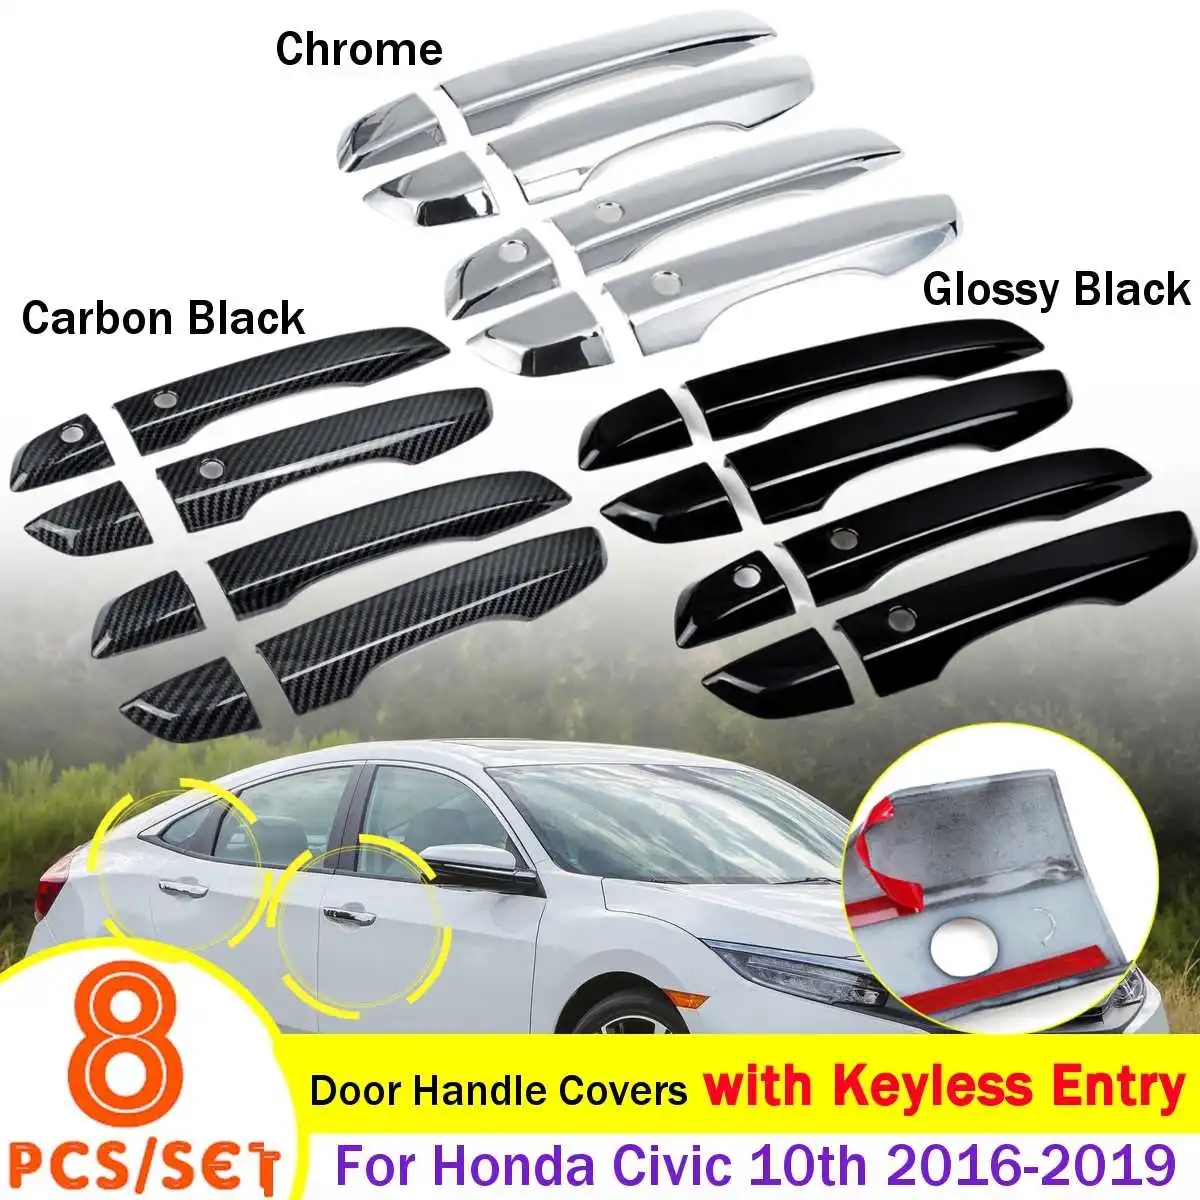 

Car Exterior Door Handles Covers with Keyless Entry For Honda for Civic 10th 2016 2017 2018 2019